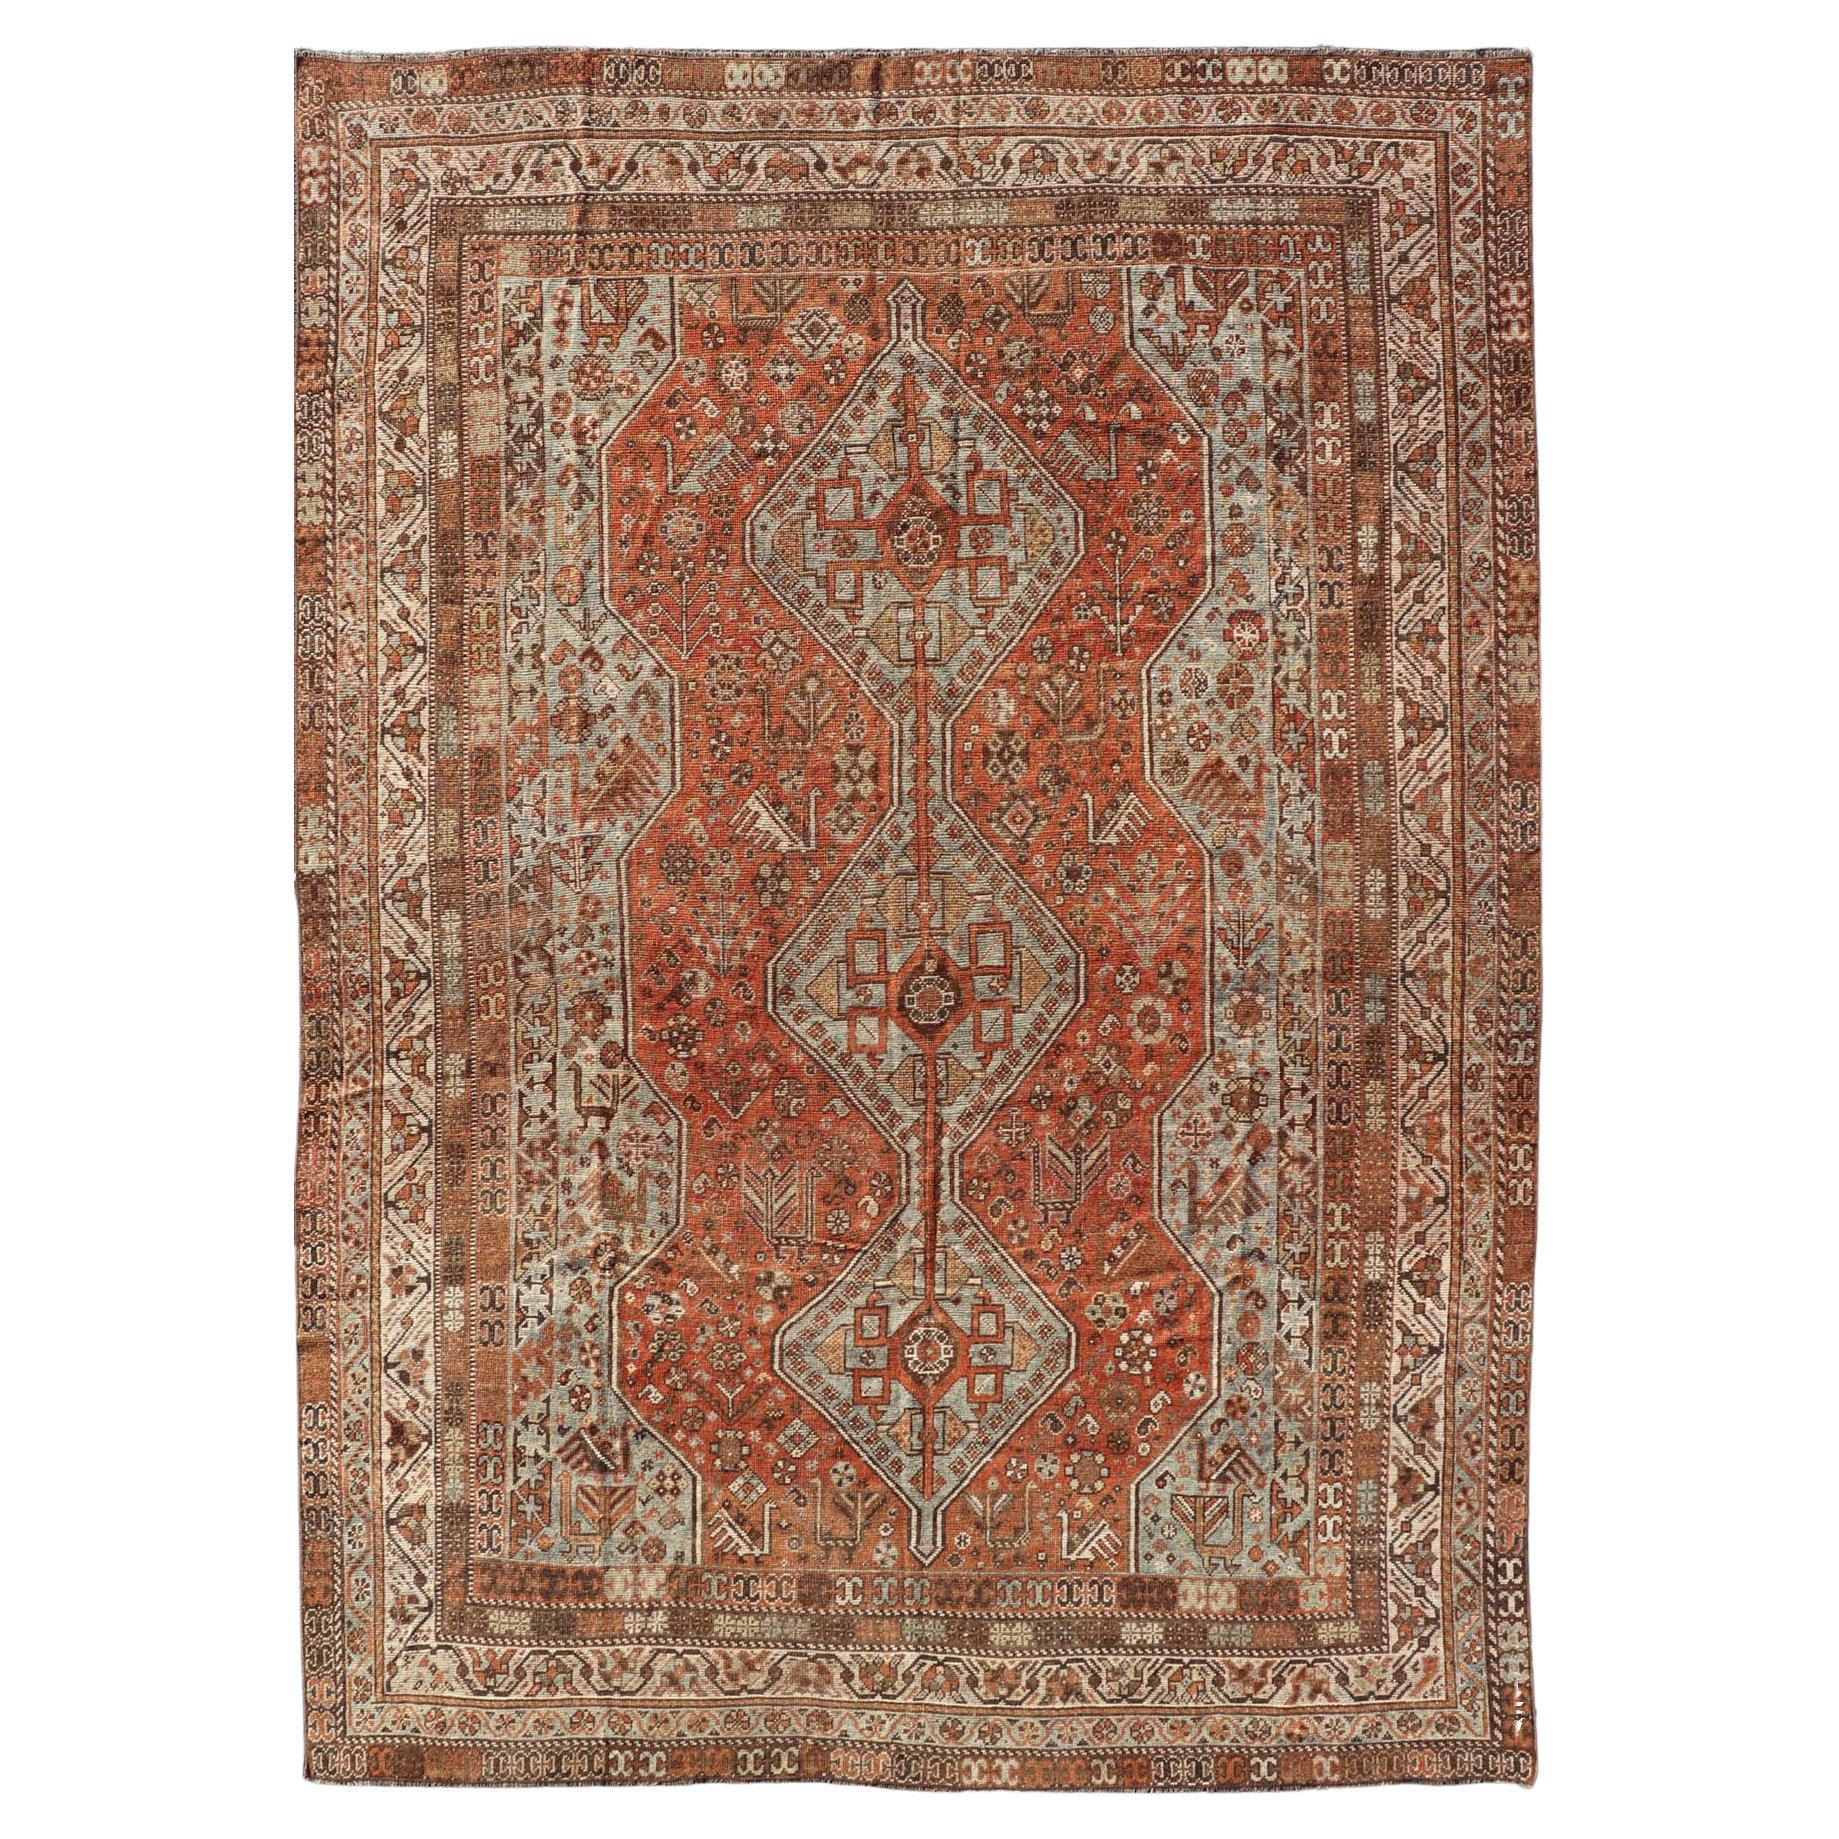 Antique Persian Shiraz Rug With Medallions Geometric in Rusty Orange, Steel Blue For Sale